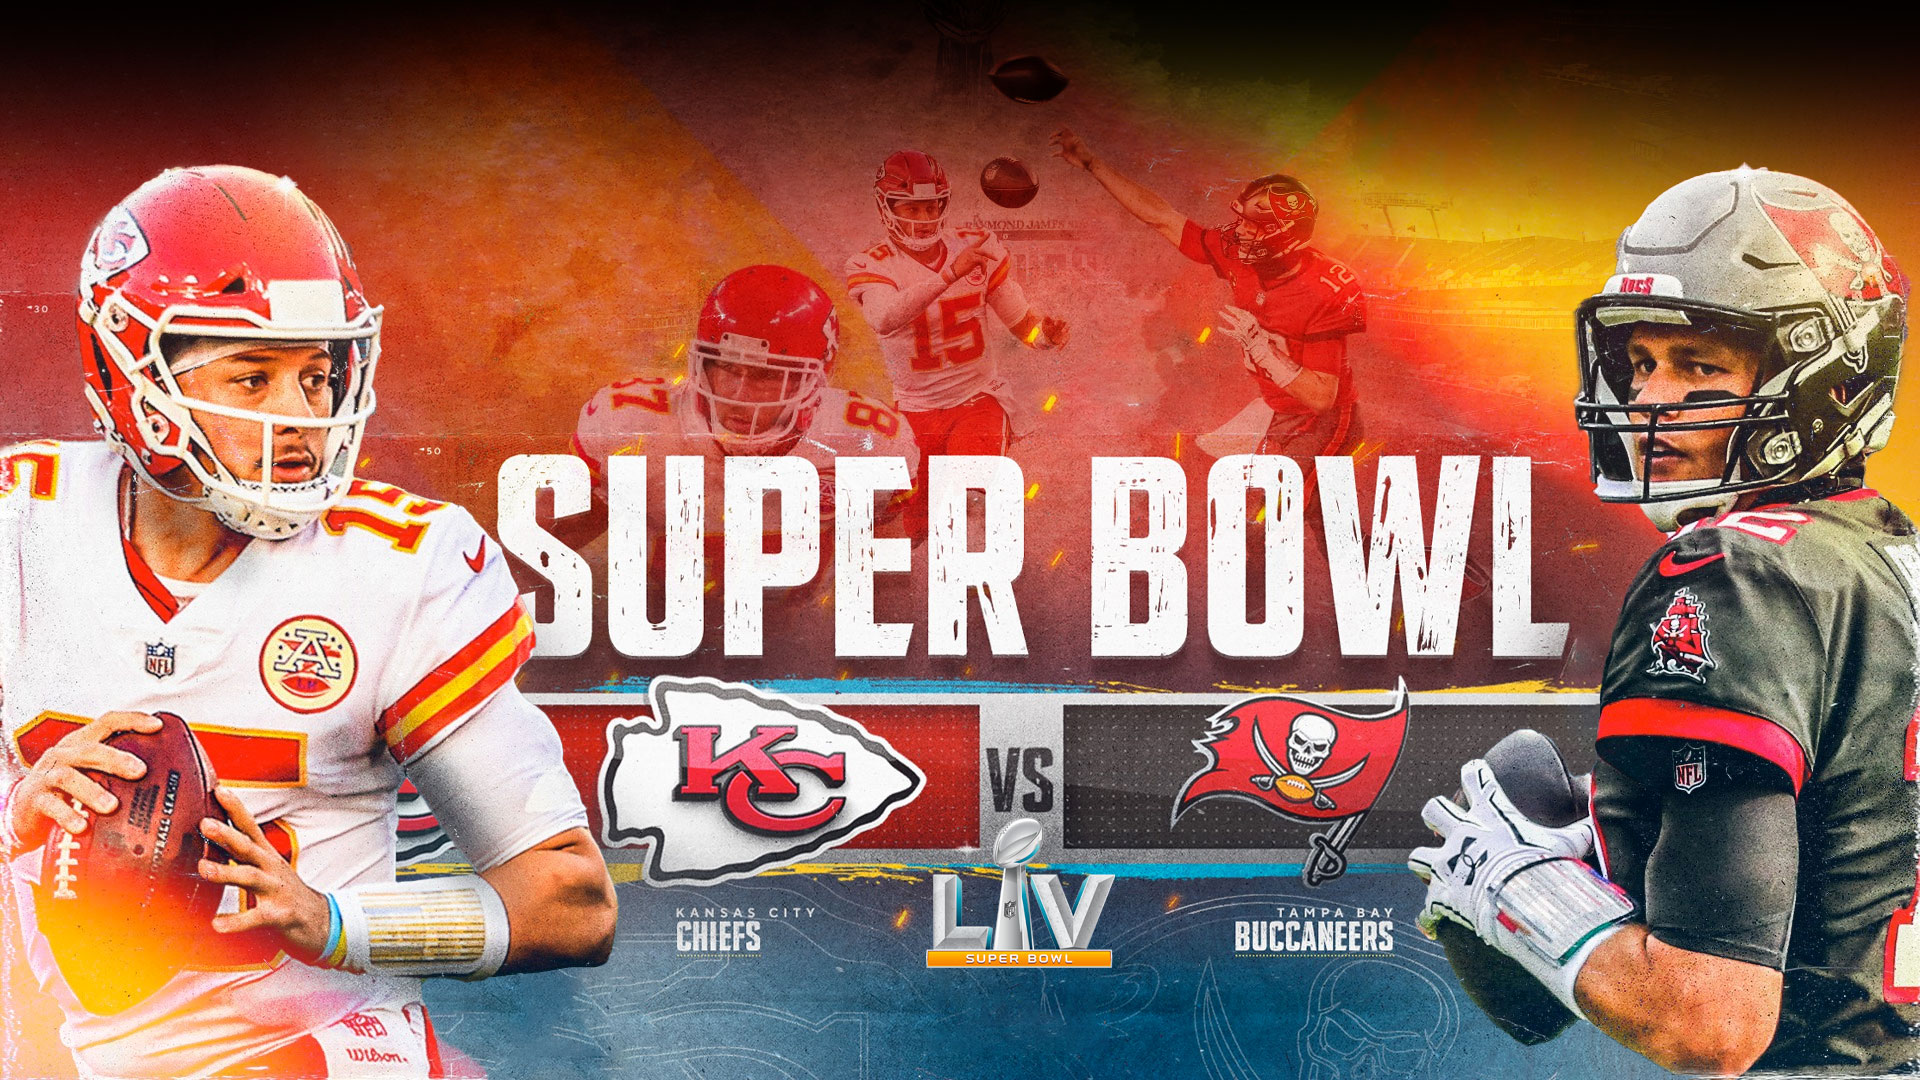 Live Tampa Bay Buccaneers Vs Kansas City Chiefs Streaming Online